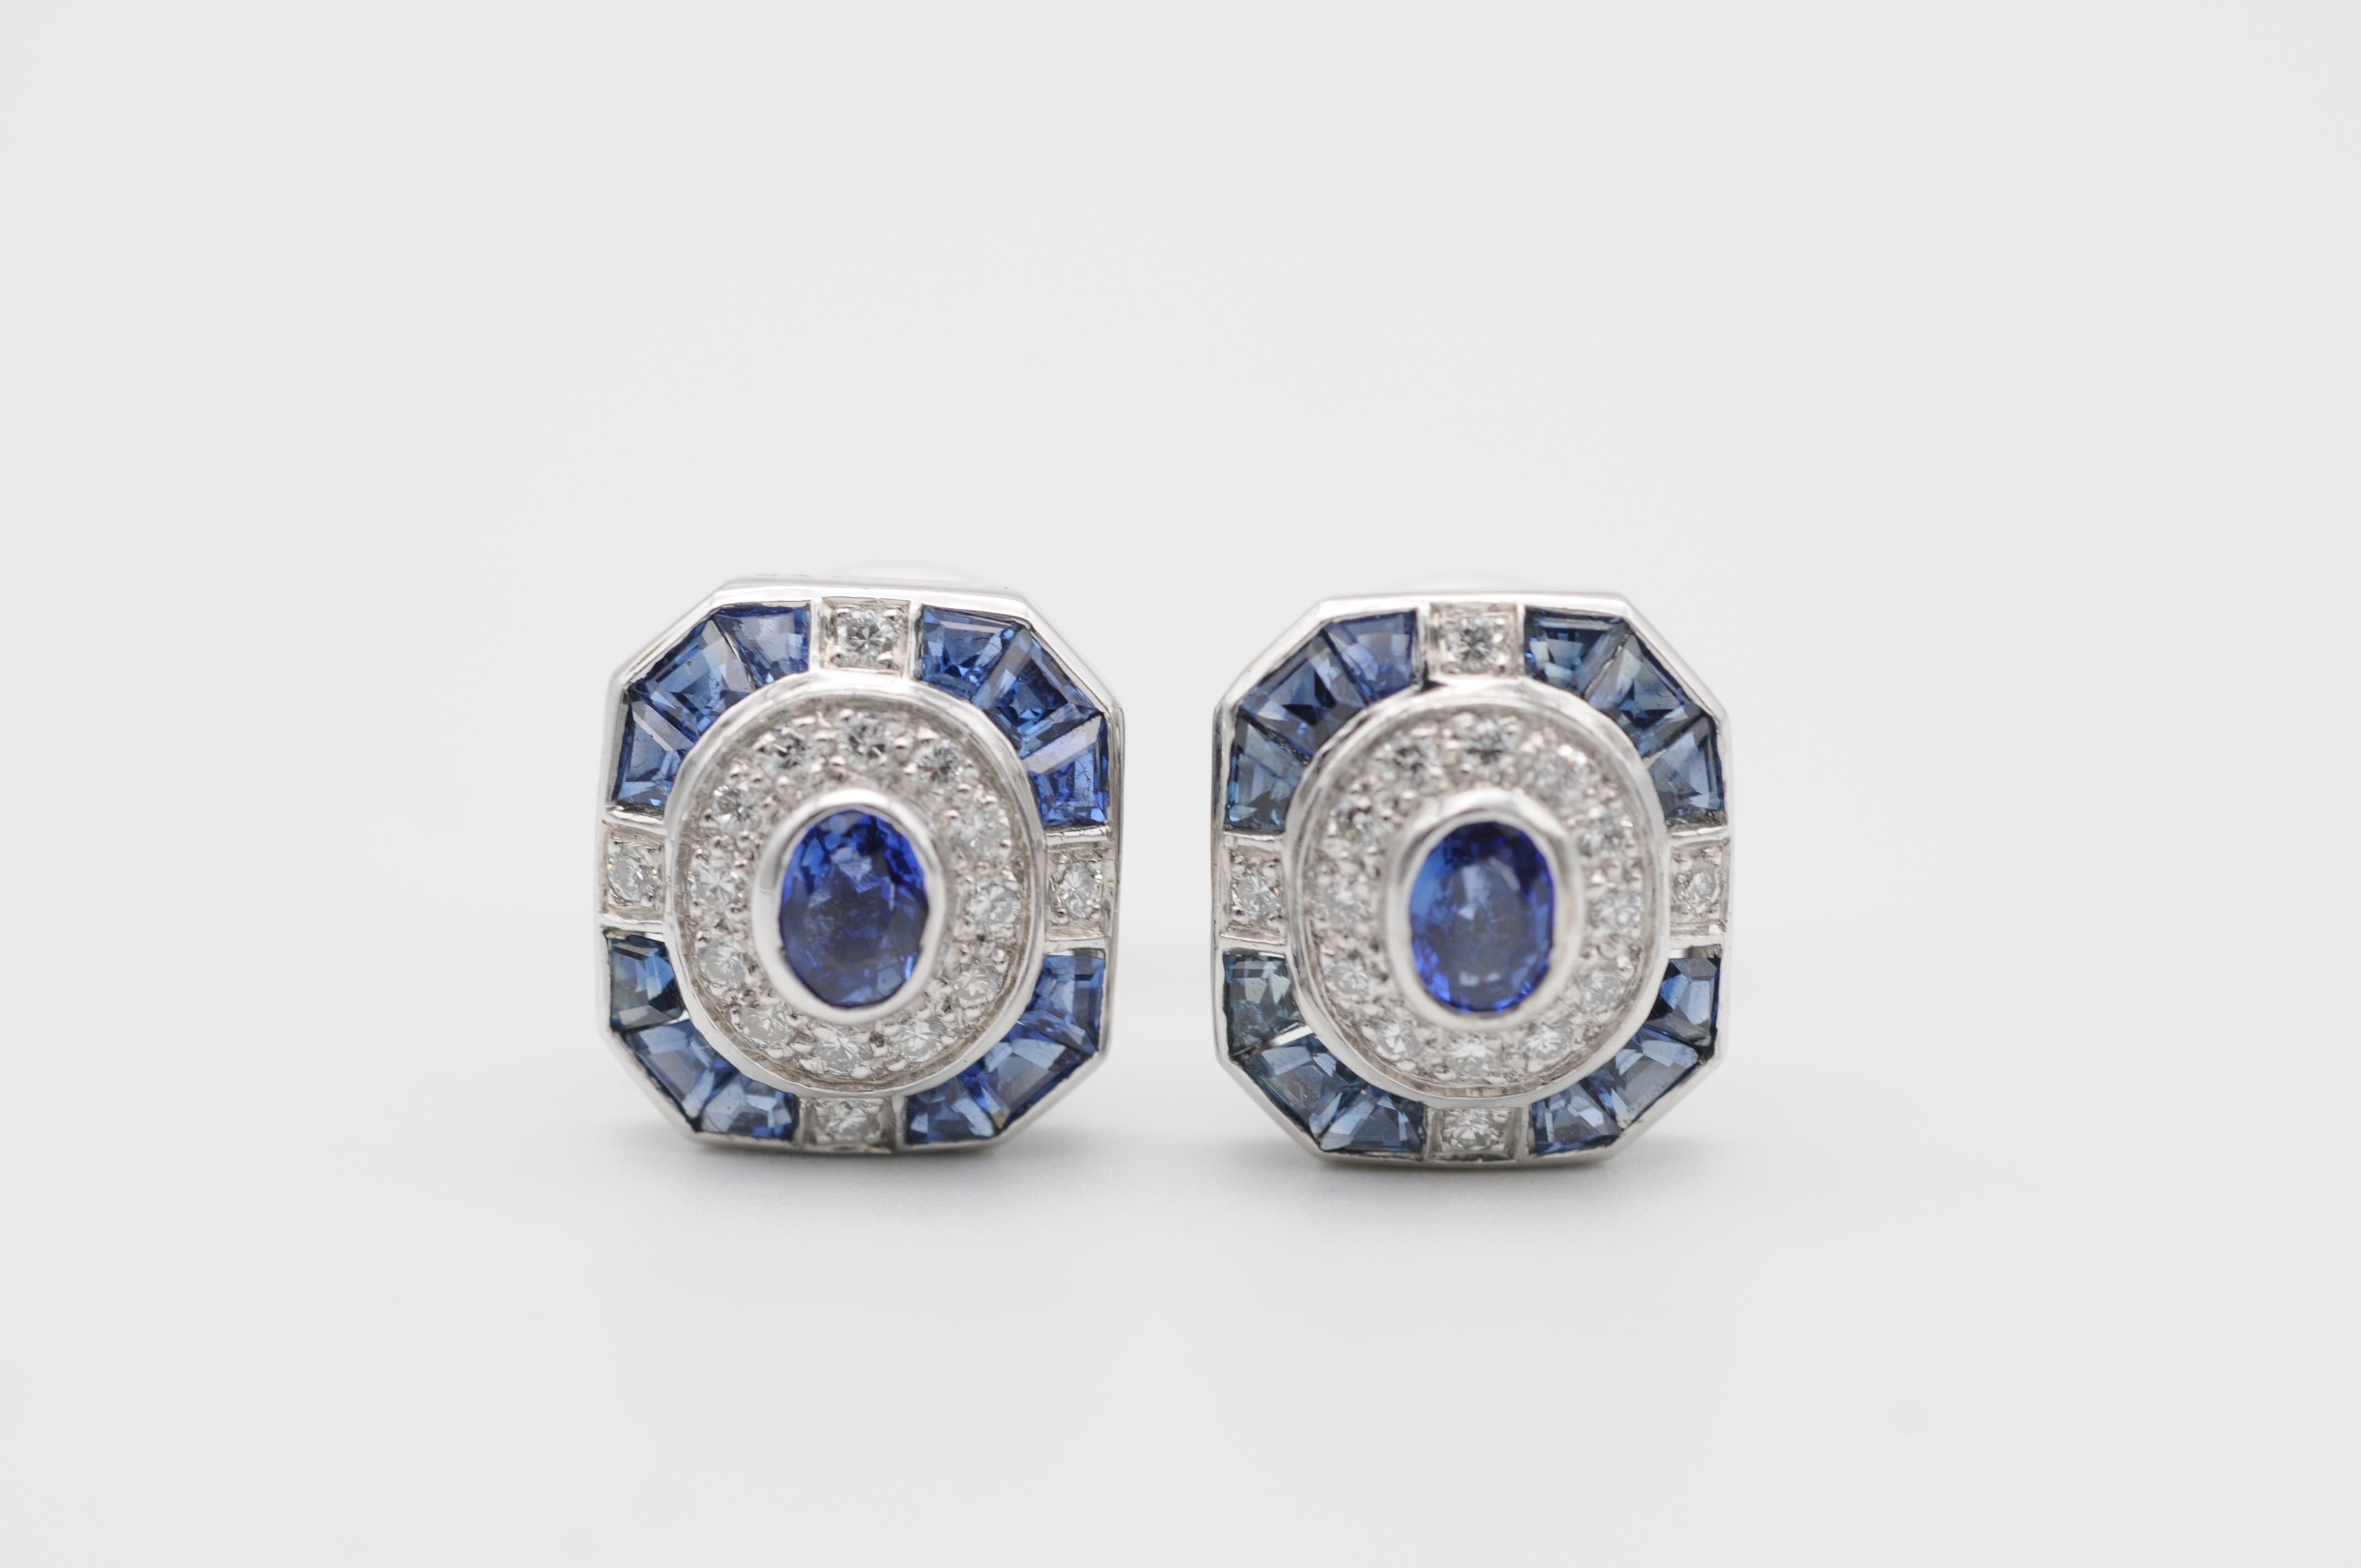 These richly set 18K cufflinks are a true masterpiece of jewelry art. The cufflinks are made of solid white gold, and each one is hallmarked with the number 31054, which confirms the authenticity and high quality of the piece. The cufflinks are set